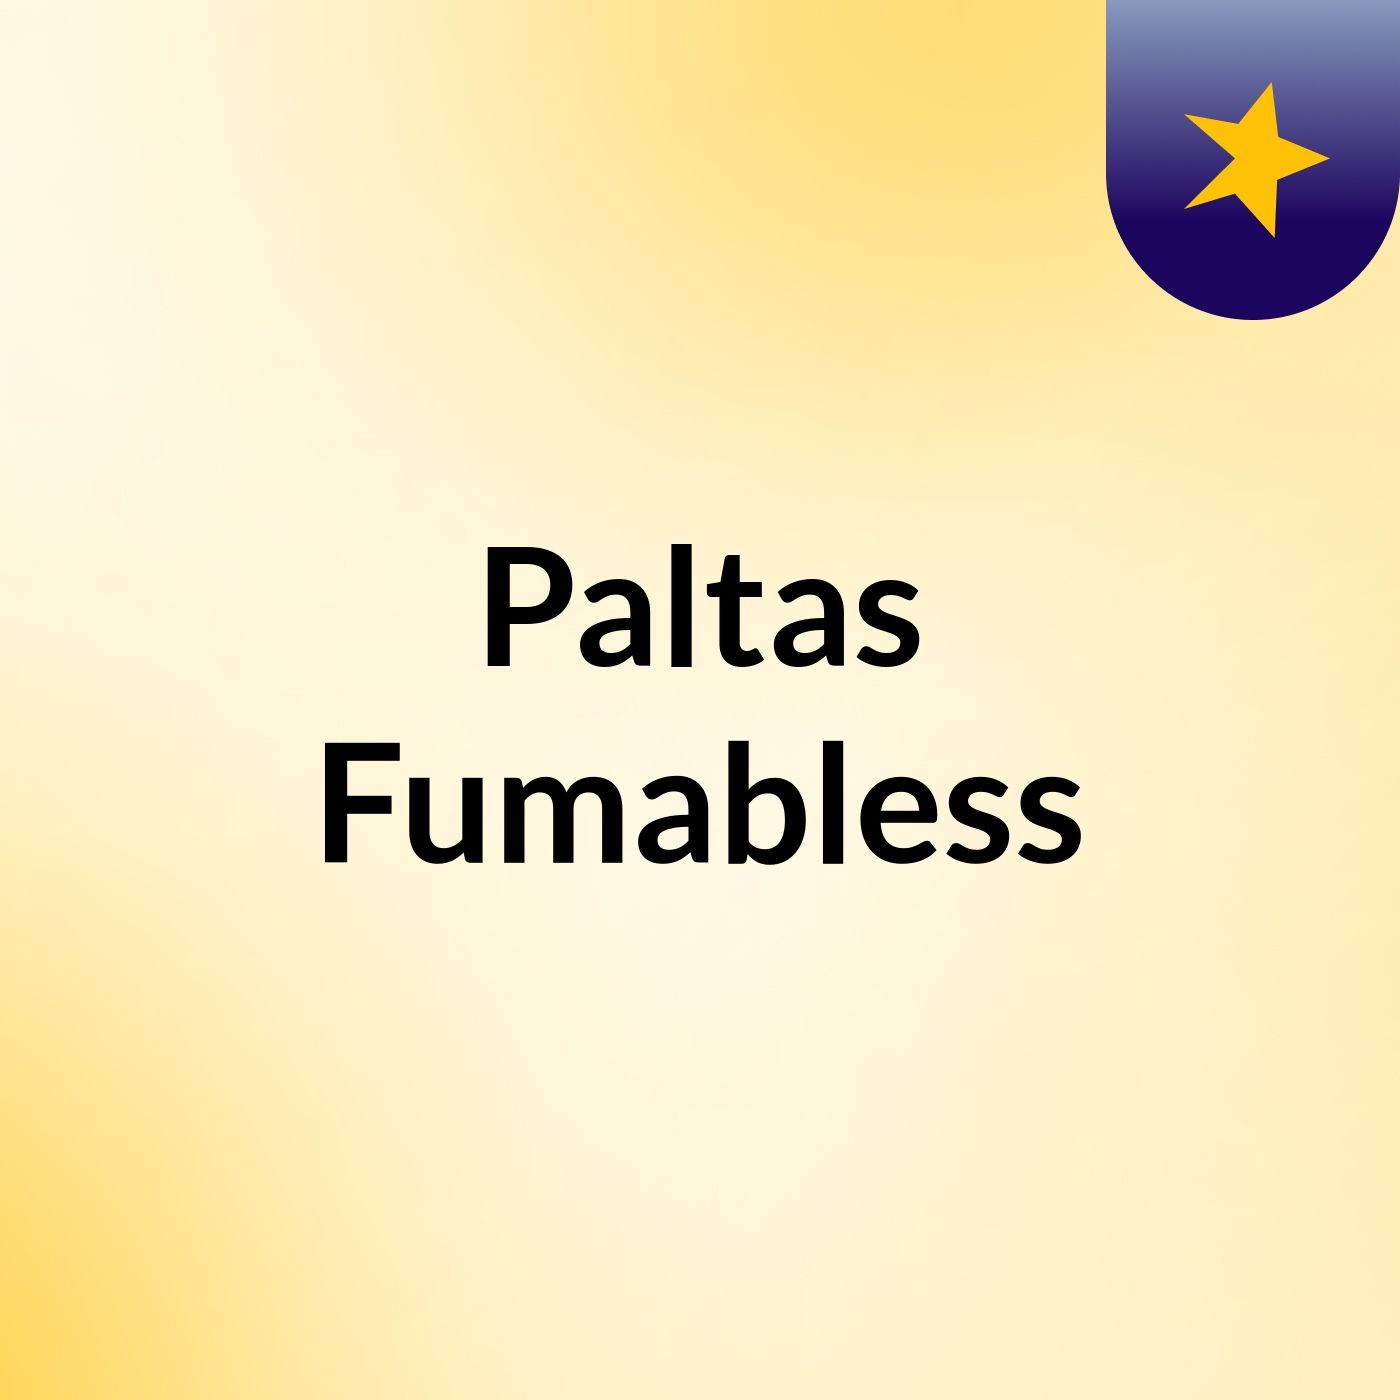 Paltas Fumabless